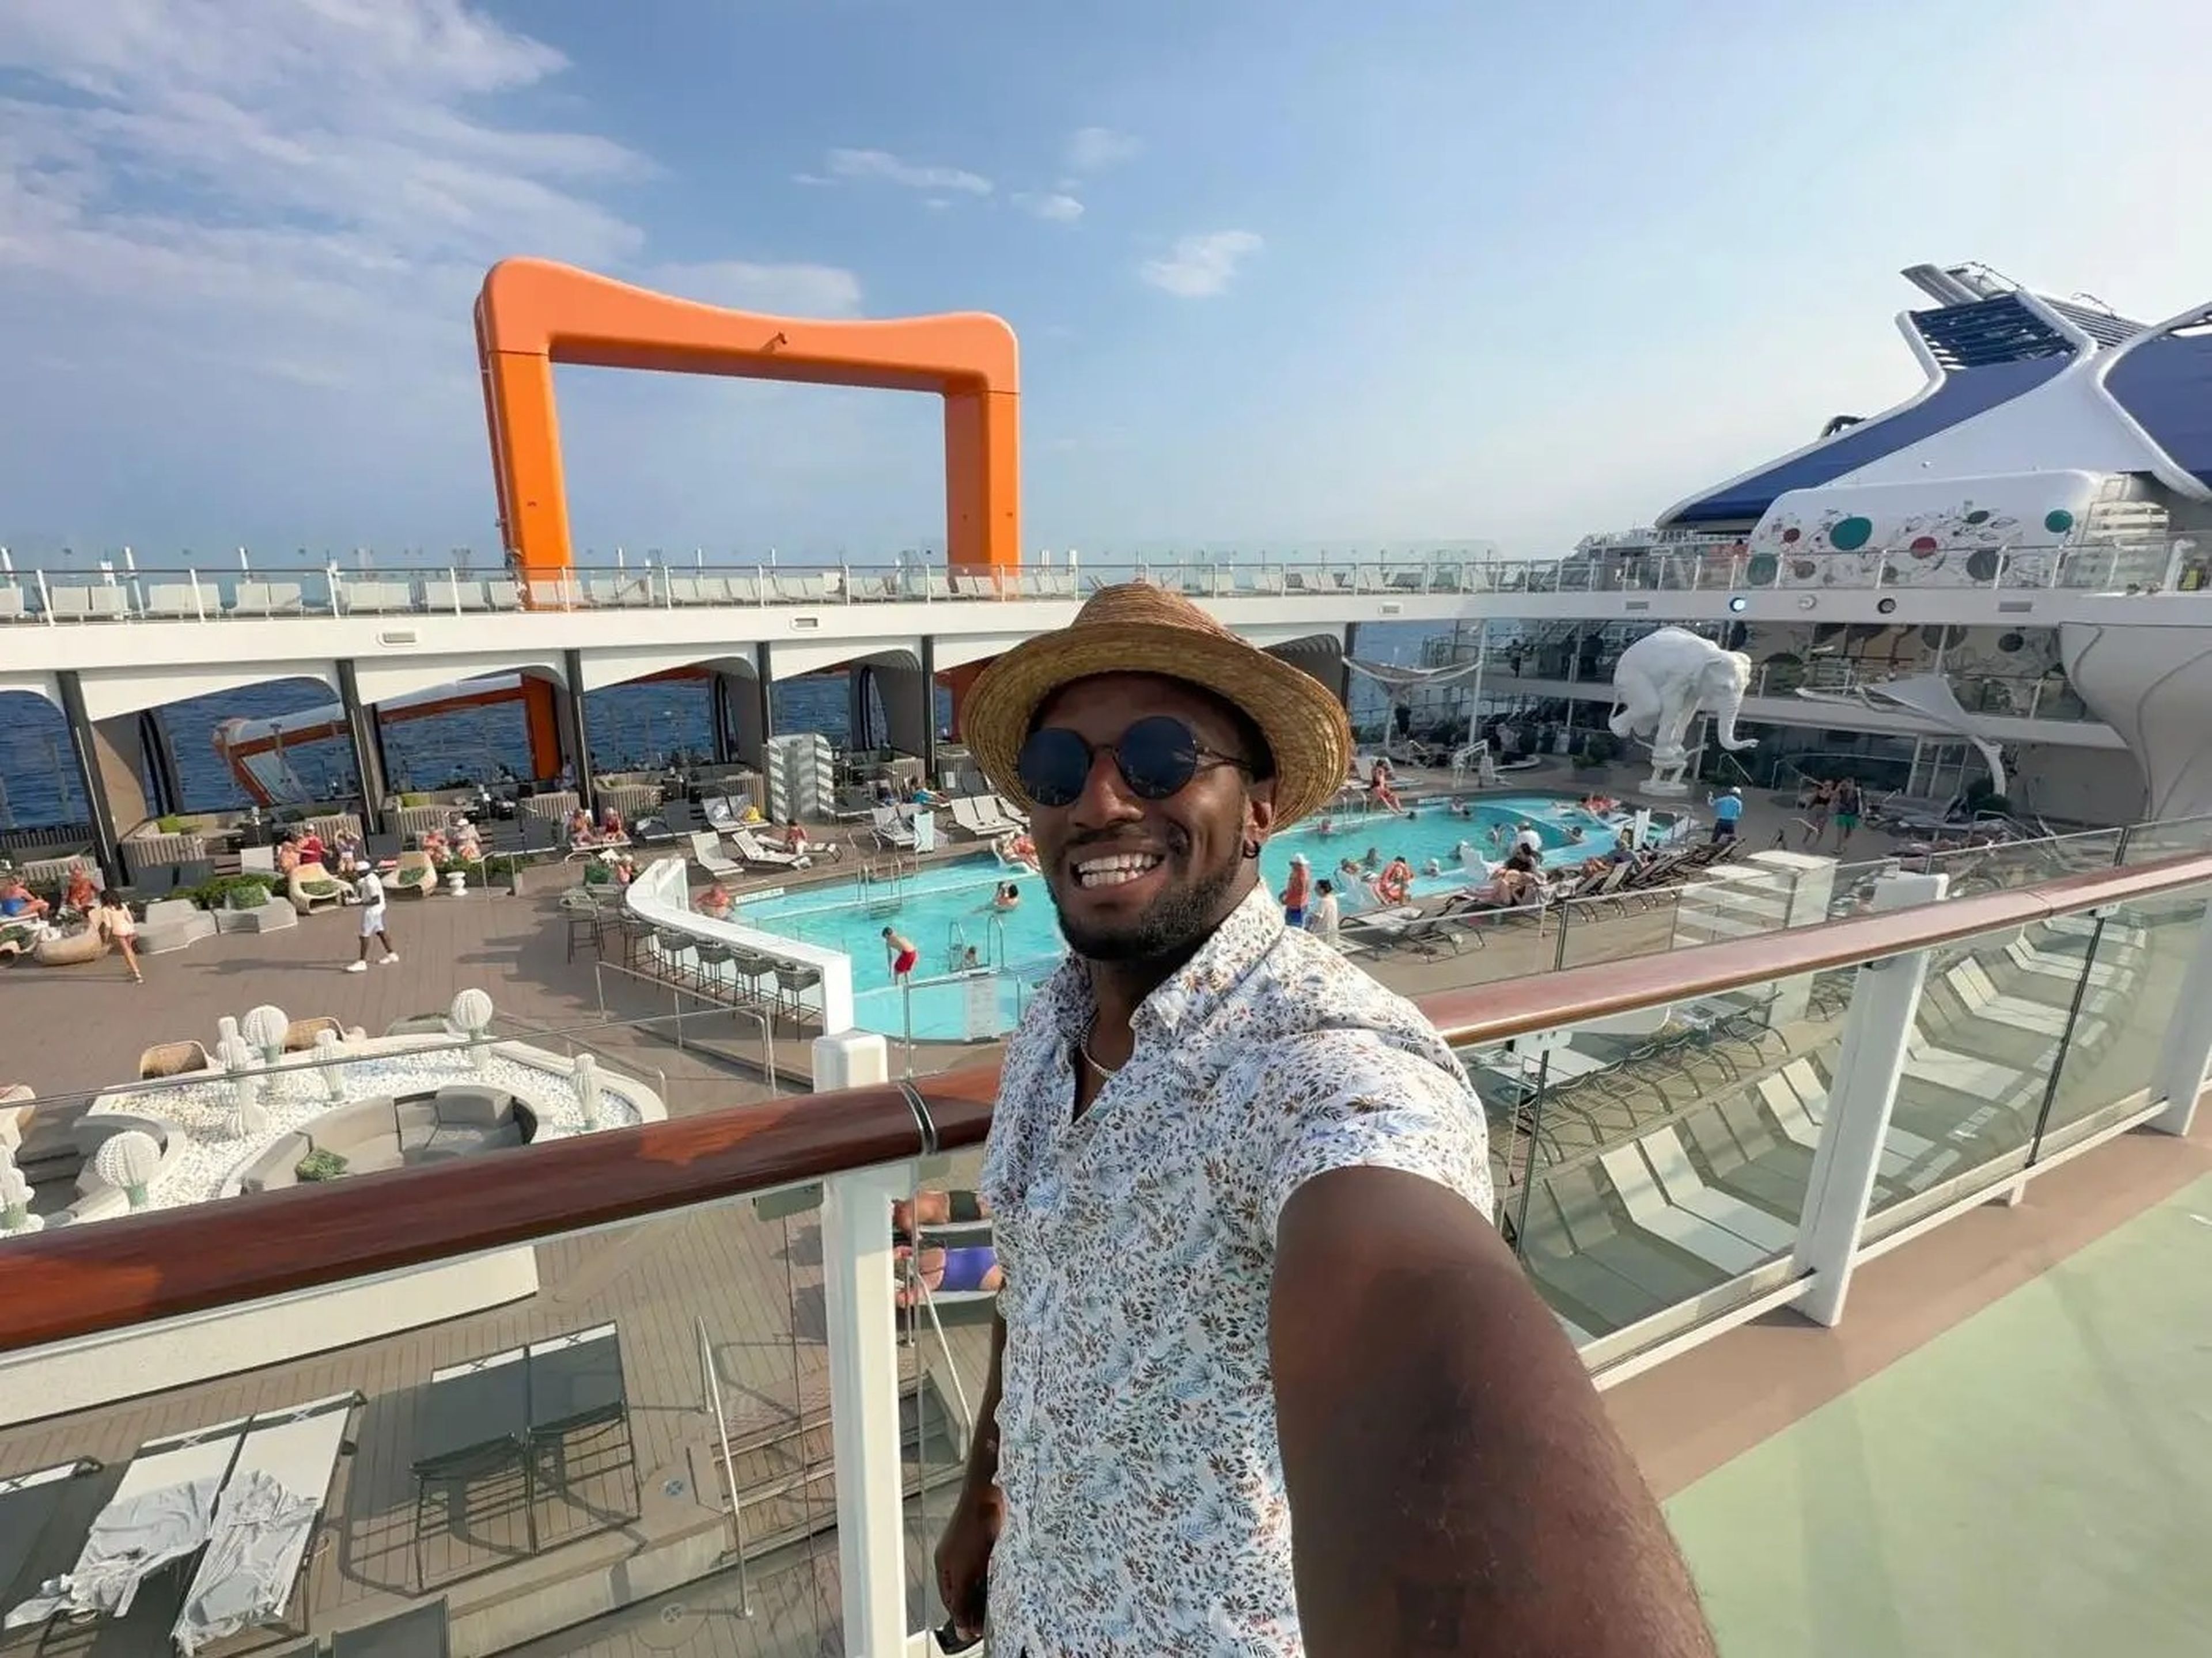 J. Alexander selfie on a cruise ship deck with pool in background